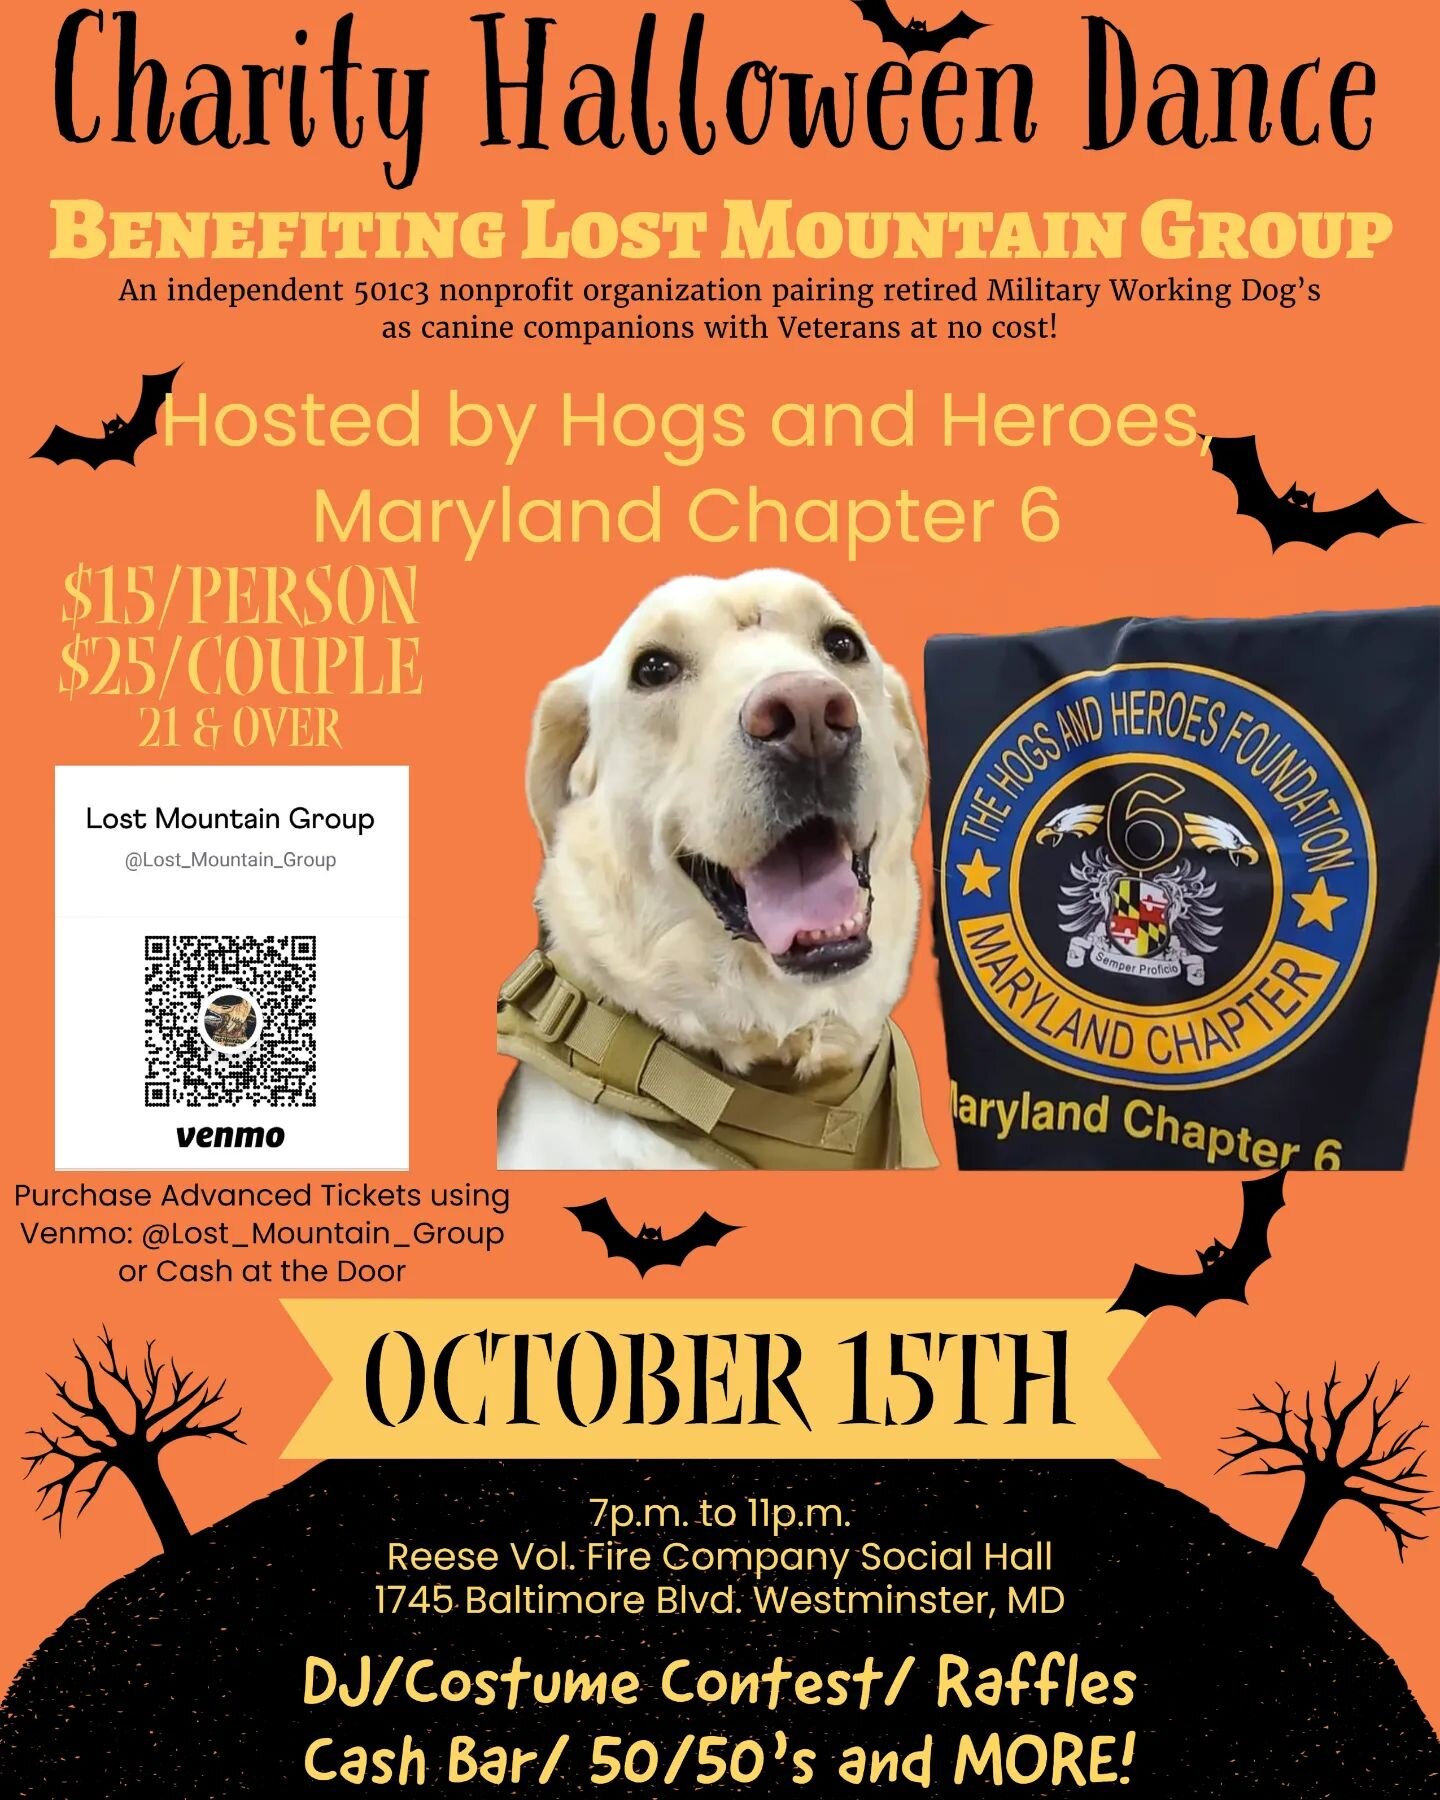 It's been a crazy summer, but we are back in the swing of things! 

For any of our NoVA and MD followers- come out and join us for a Charity Halloween Benefit Dance benefiting @lostmountaingroup on Saturday, October 15th in Westminster,  MD!